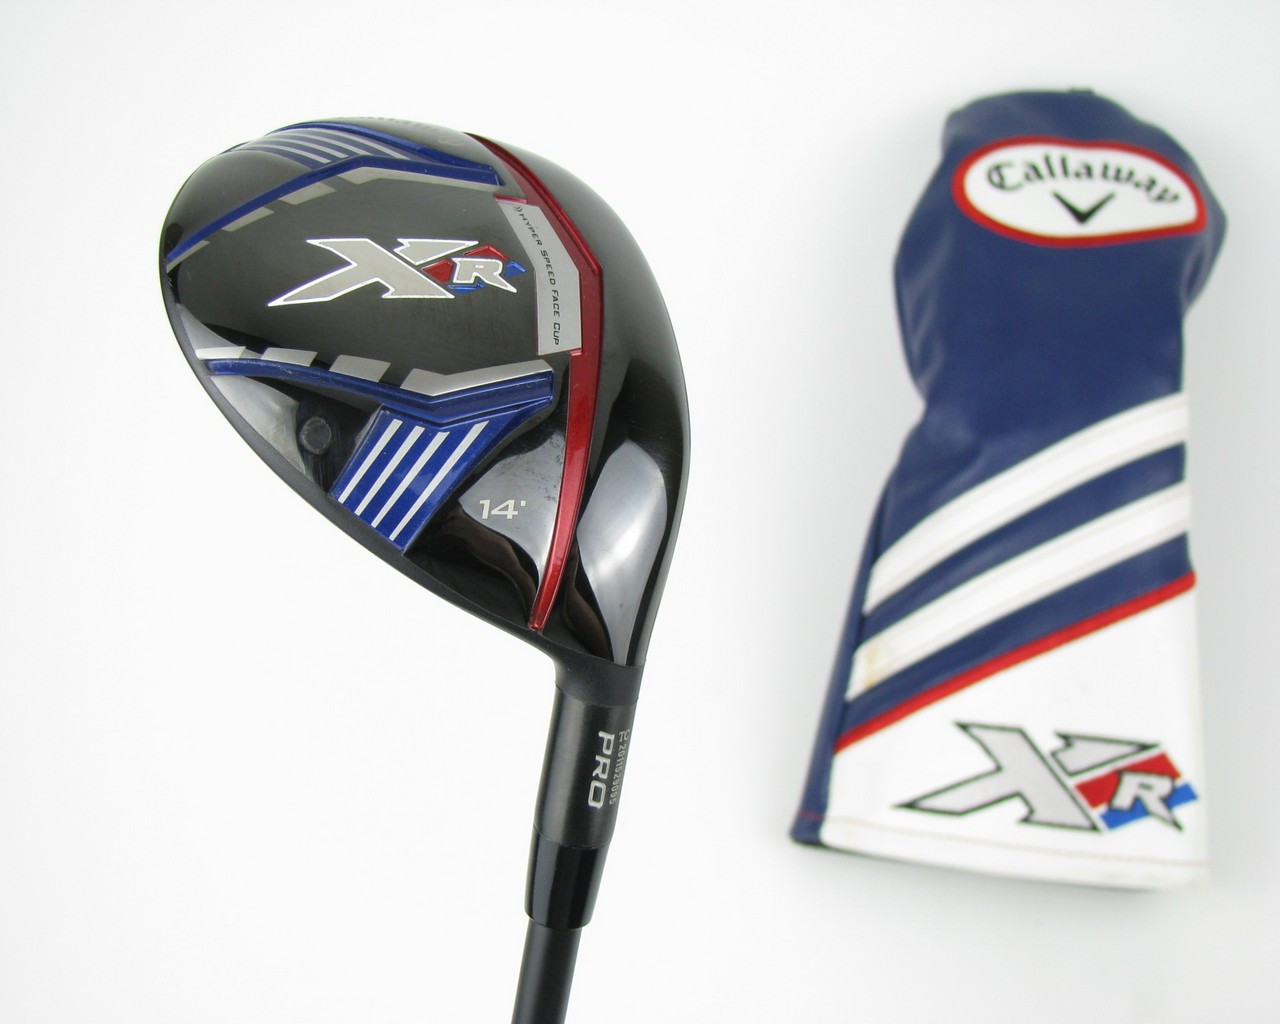 TOUR ISSUE Callaway XR Pro Fairway Wood 14 Degree W/ Project X HZRDUS 76g X  Flex (Out Of Stock) | Callaway Xr Pro 14 Degree | sincovaga.com.br